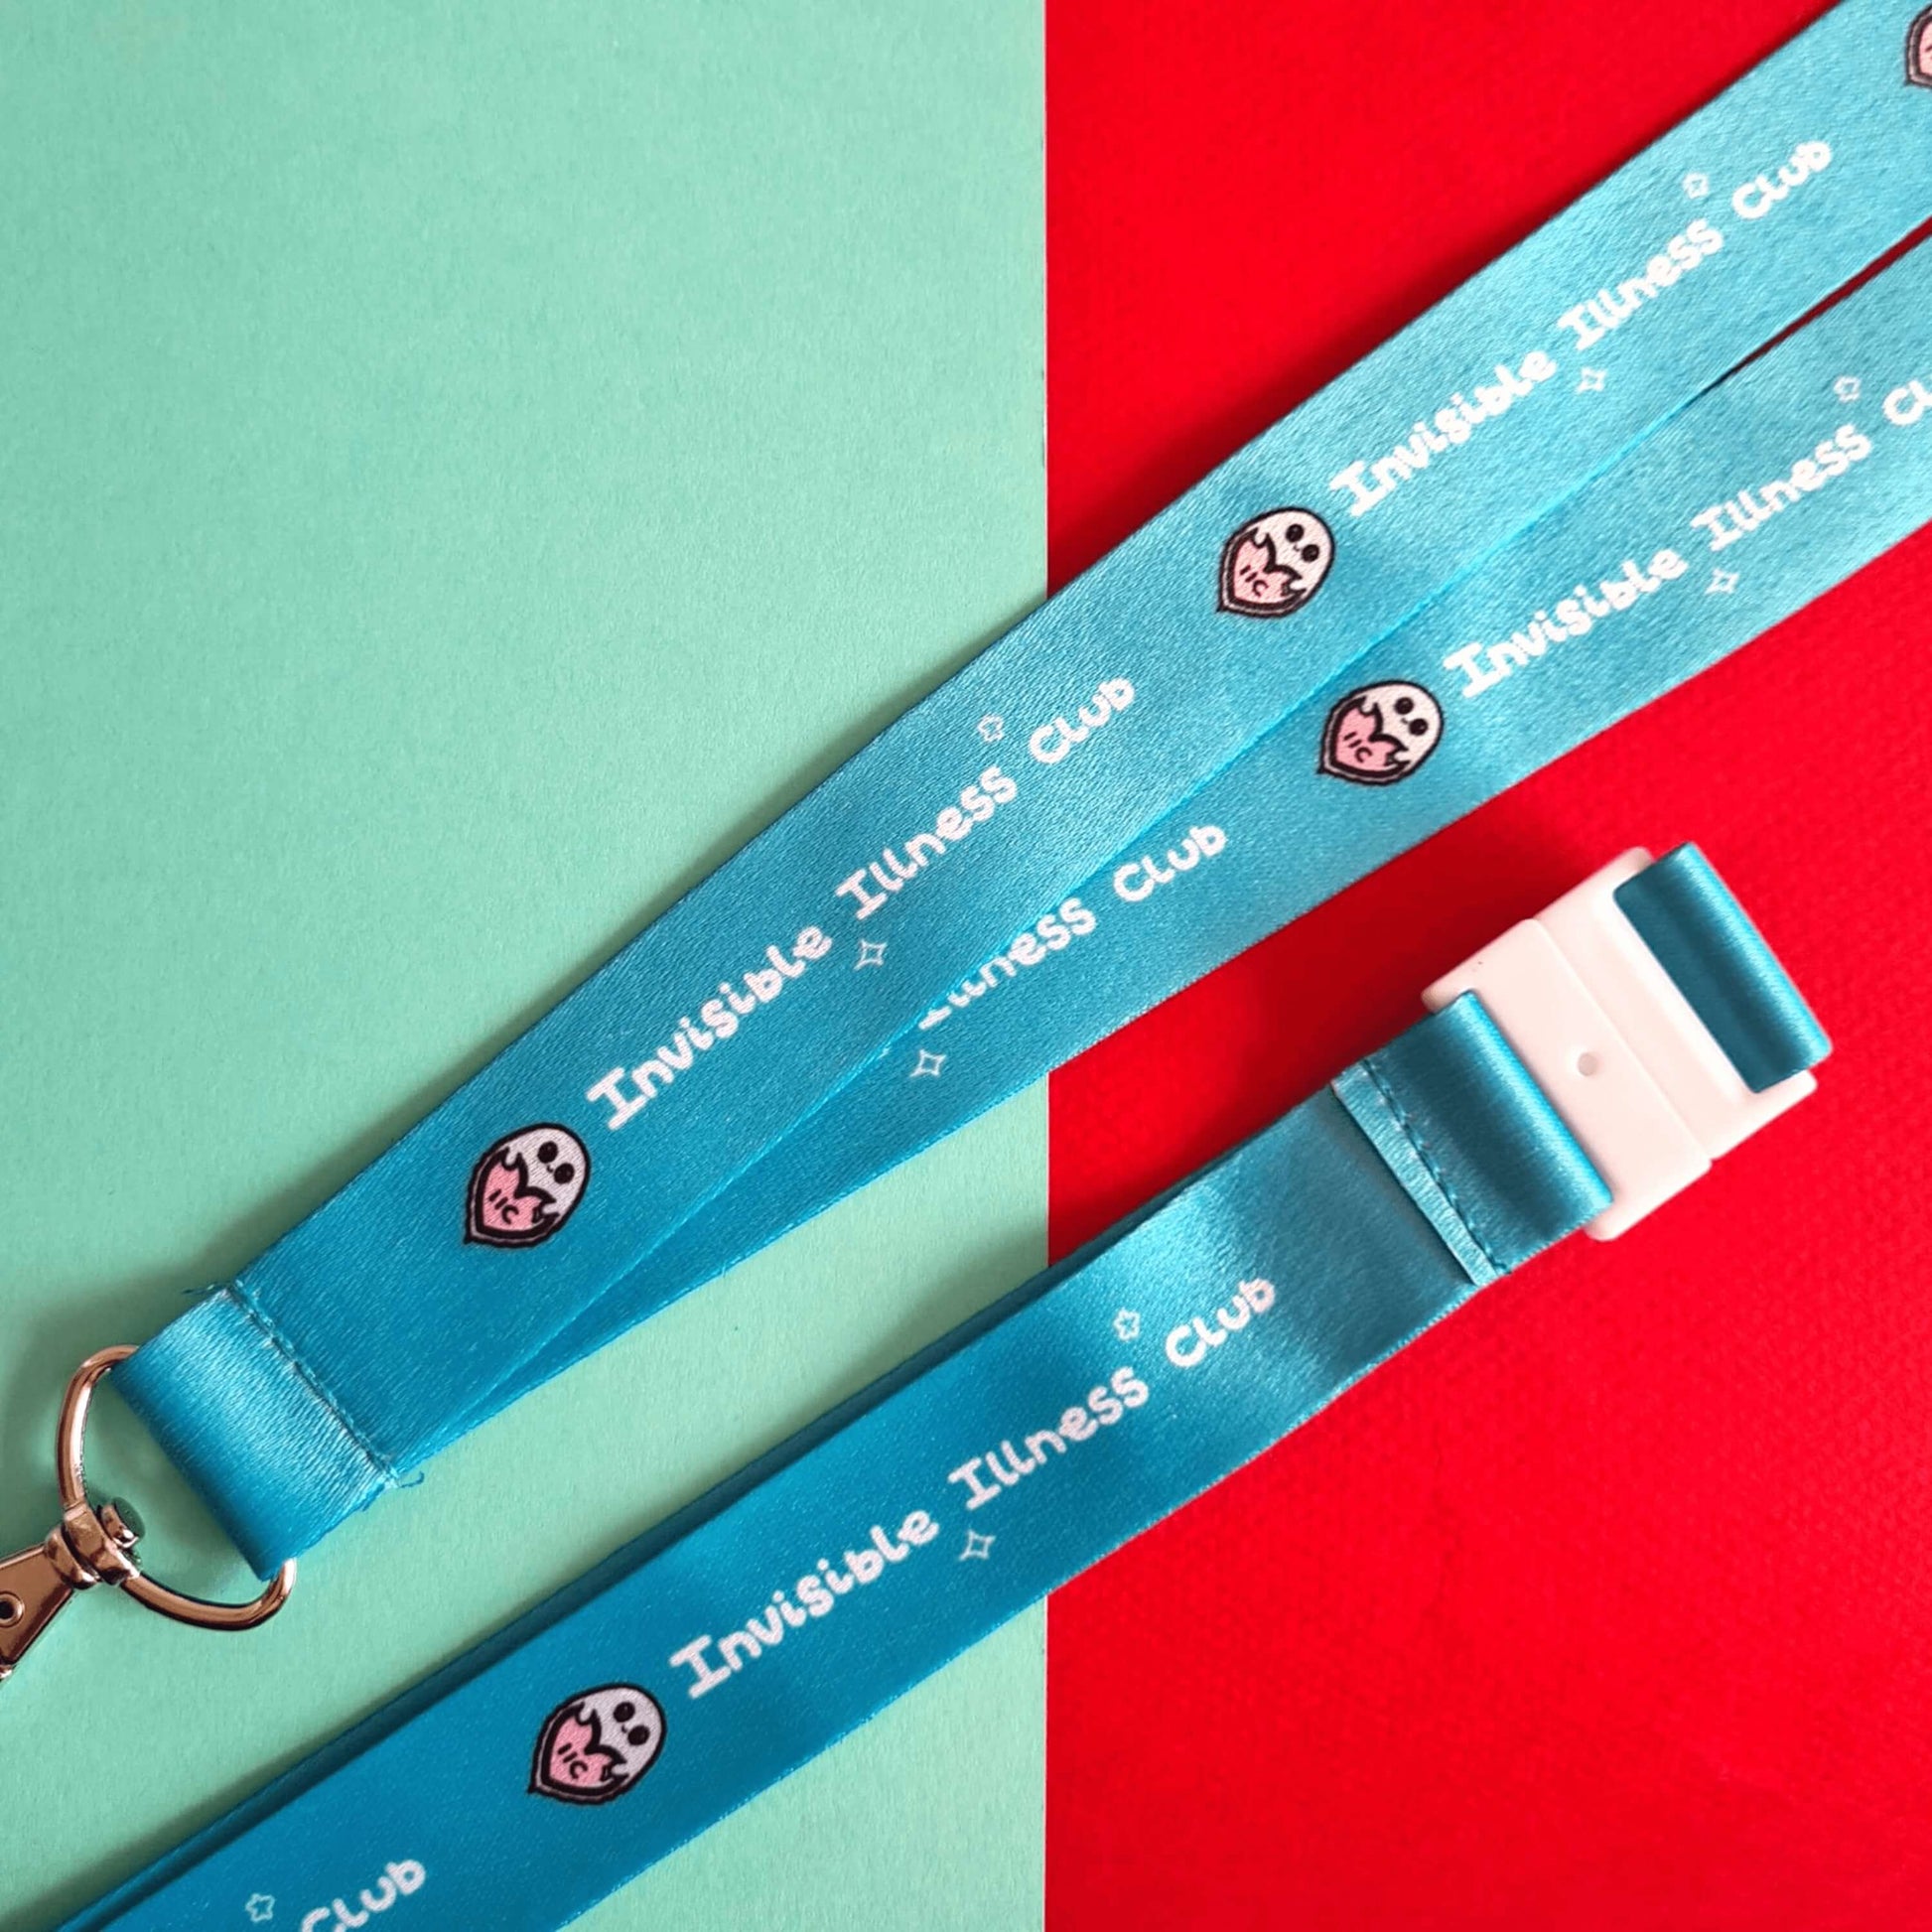 Pastel blue lanyard with 'Invisible Illness Club' written on it in white with Innabox ghost logo. The lanyard has a white clasp and silver lobster clip. Shown on a red and blue background. Raising awareness for invisible illnesses.